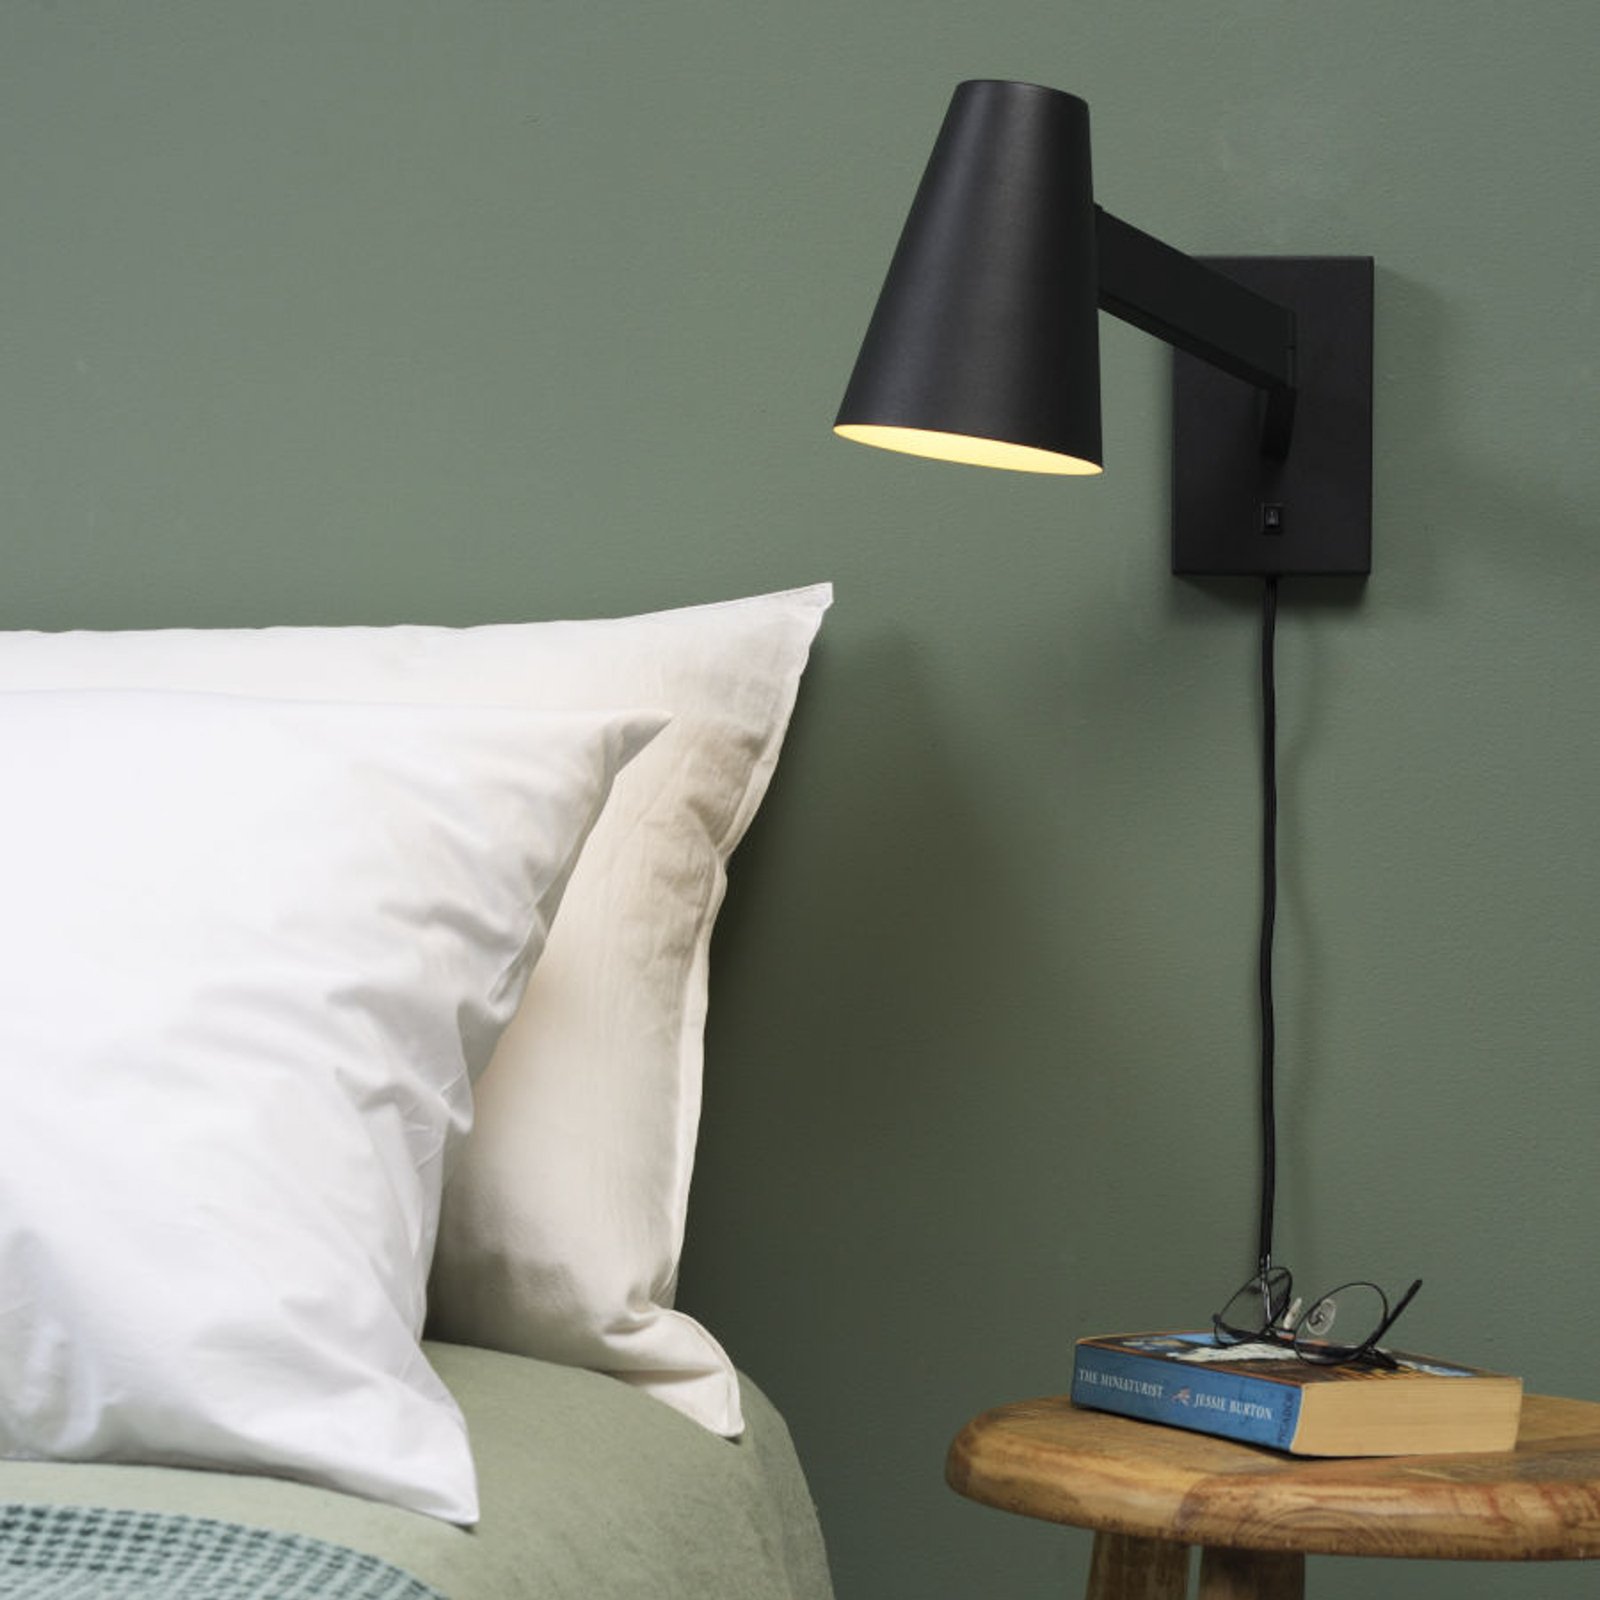 It’s about RoMi Biarritz wall lamp, 40 cm, black